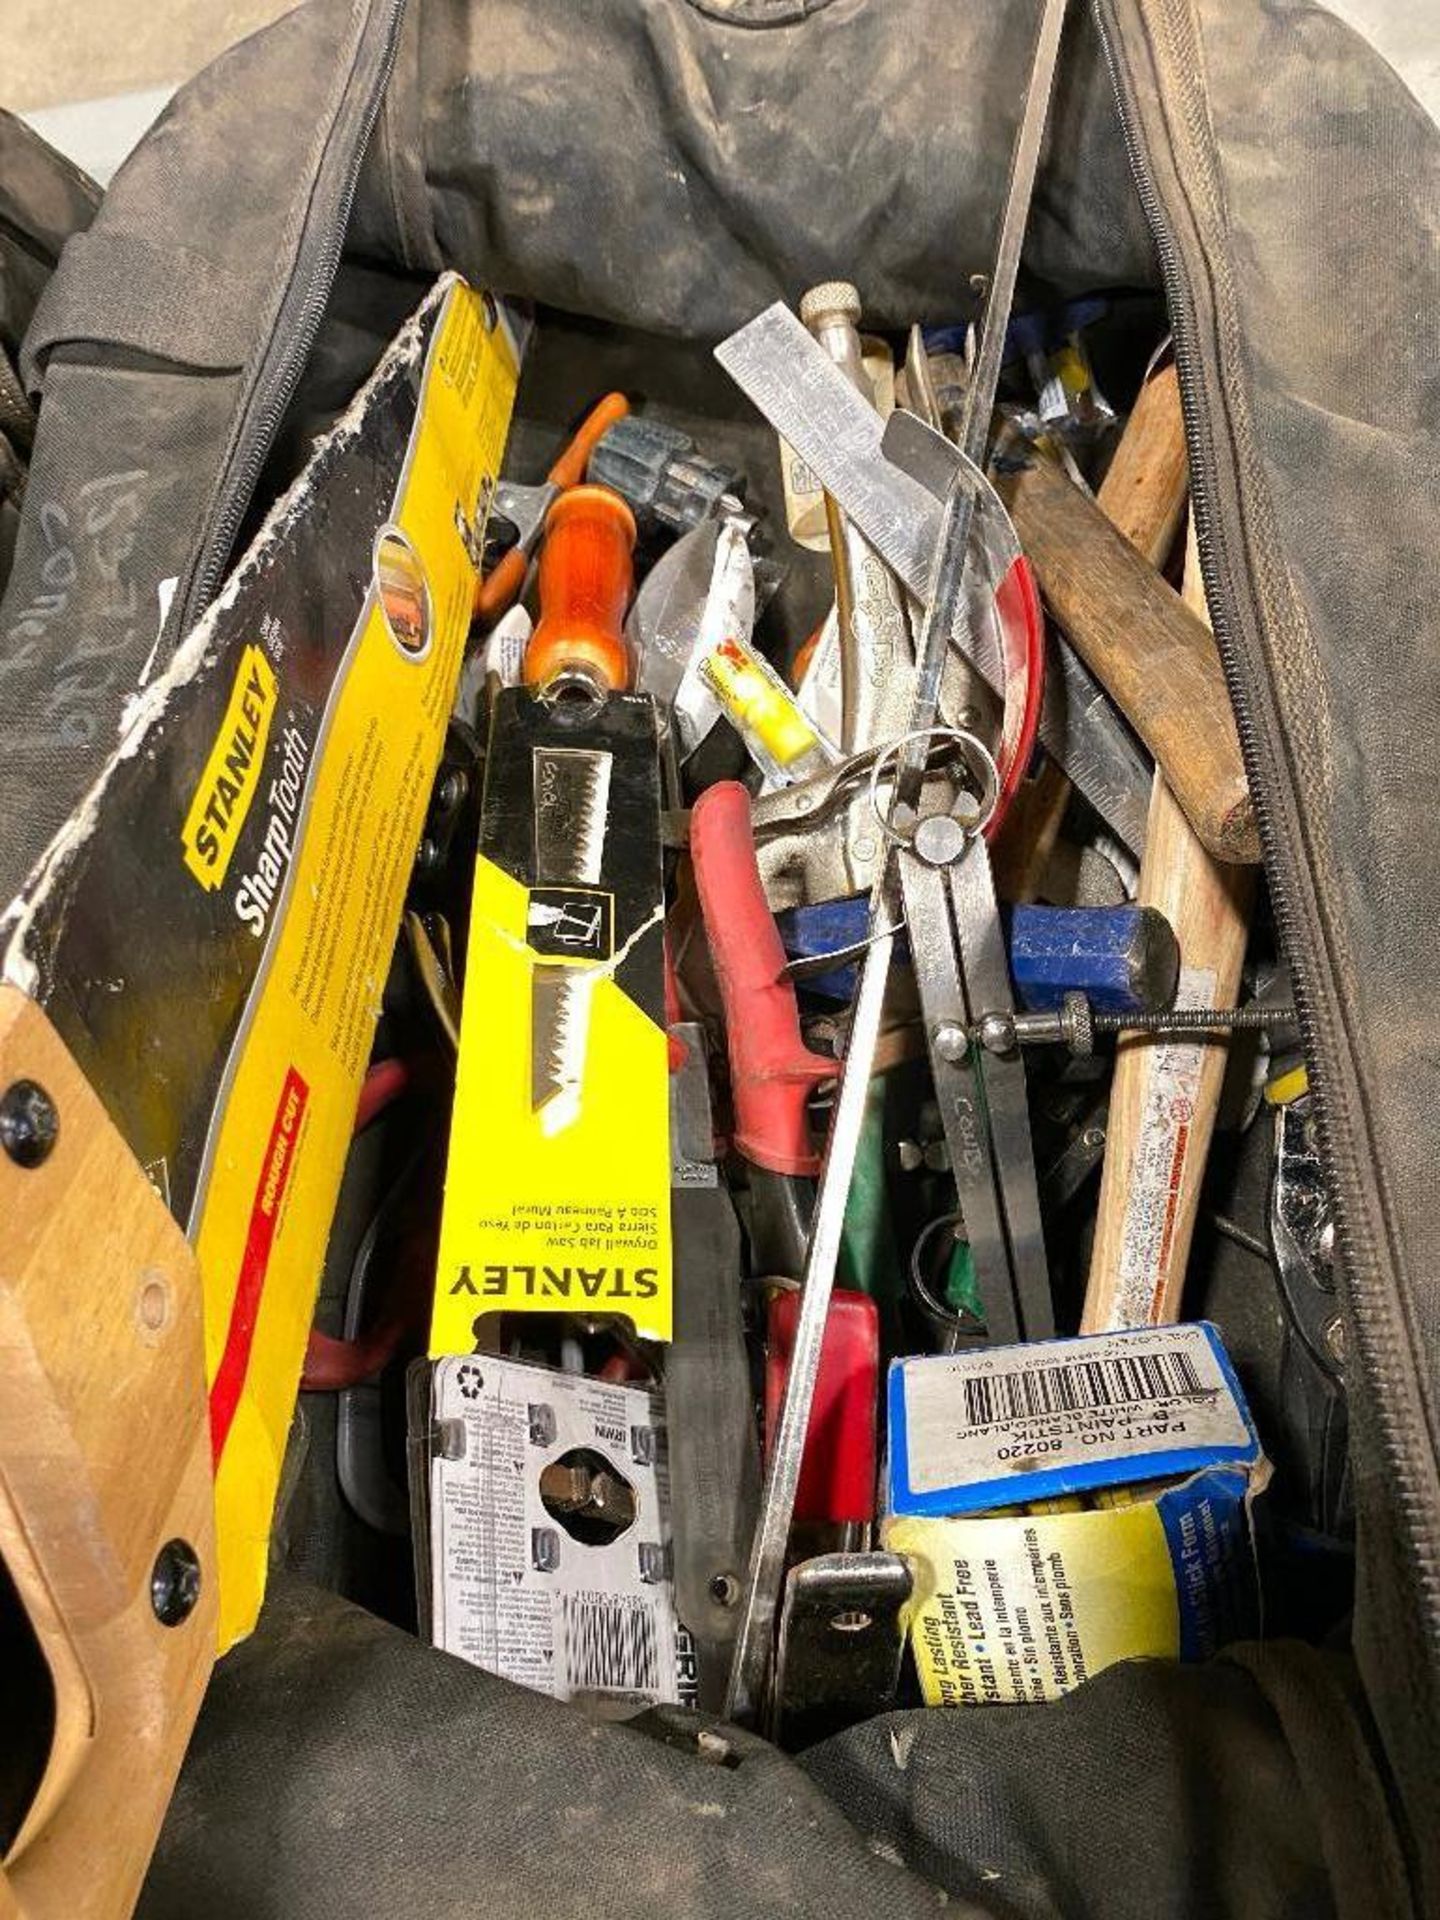 Lot of Asst. Hand Tools including Hammer, Saw, Snips, Vise Grips, Clamps, etc. - Image 4 of 6